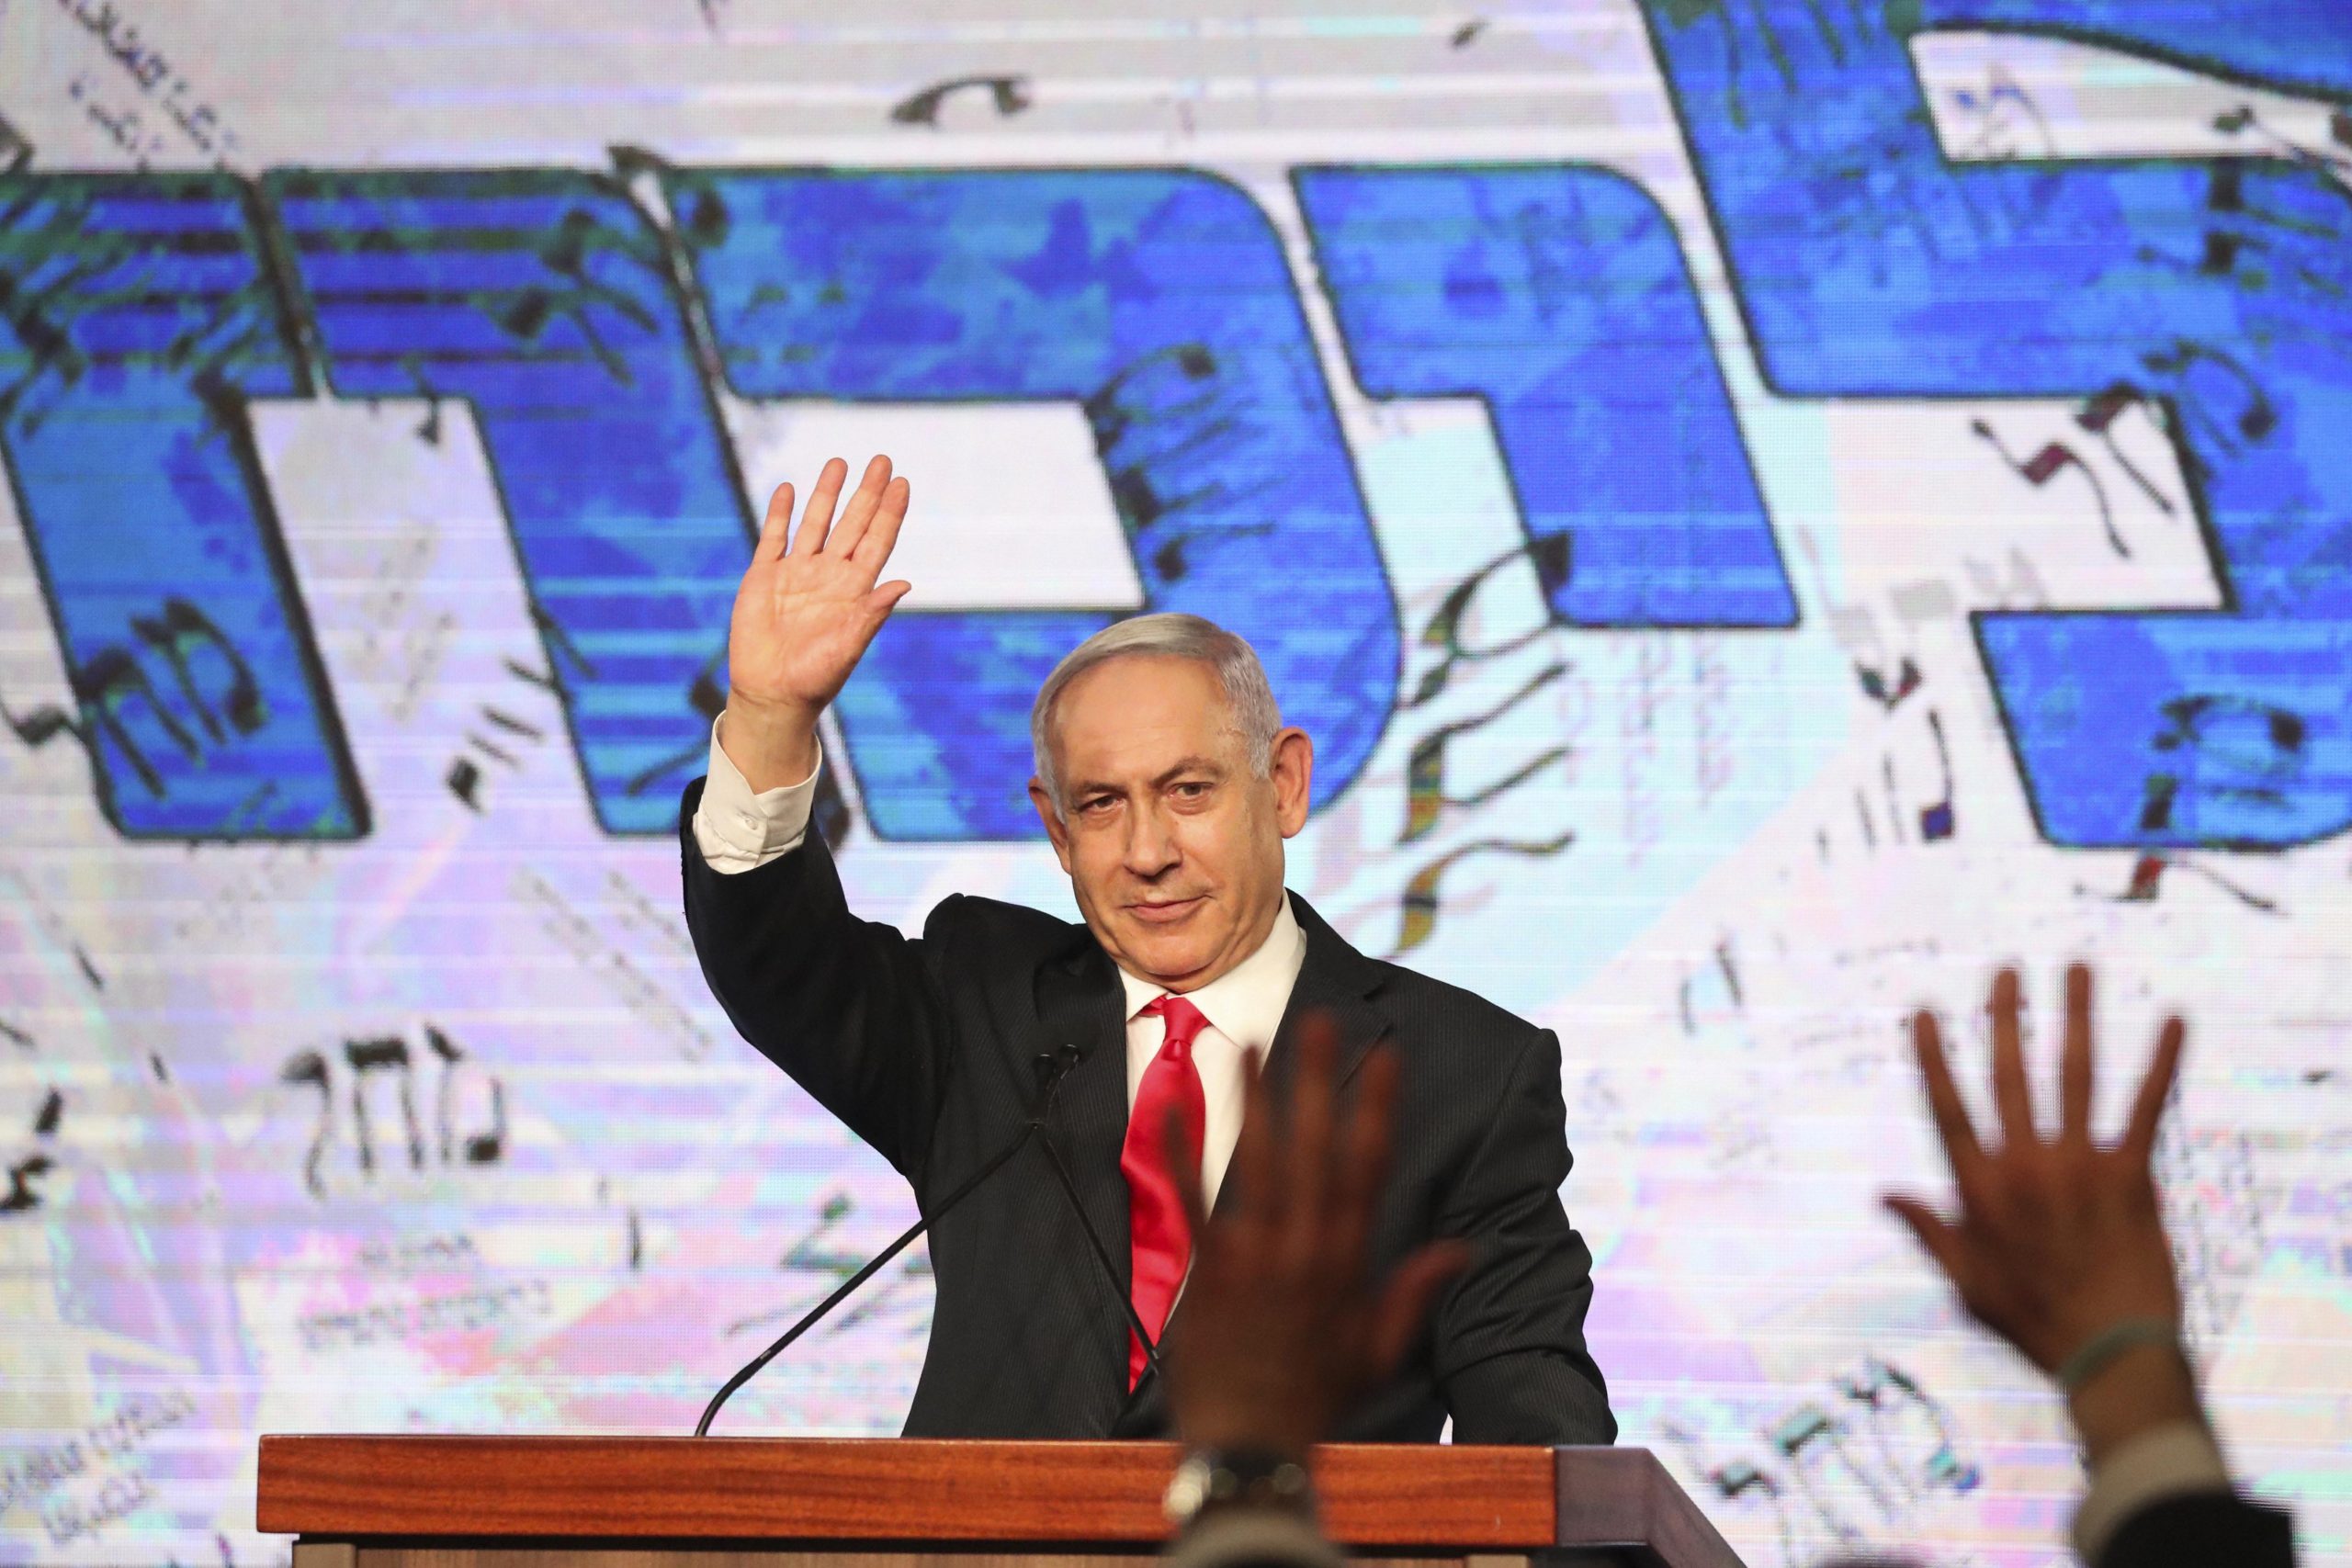 Hamas will be hit in ways that it does not expect, says Israels Netanyahu